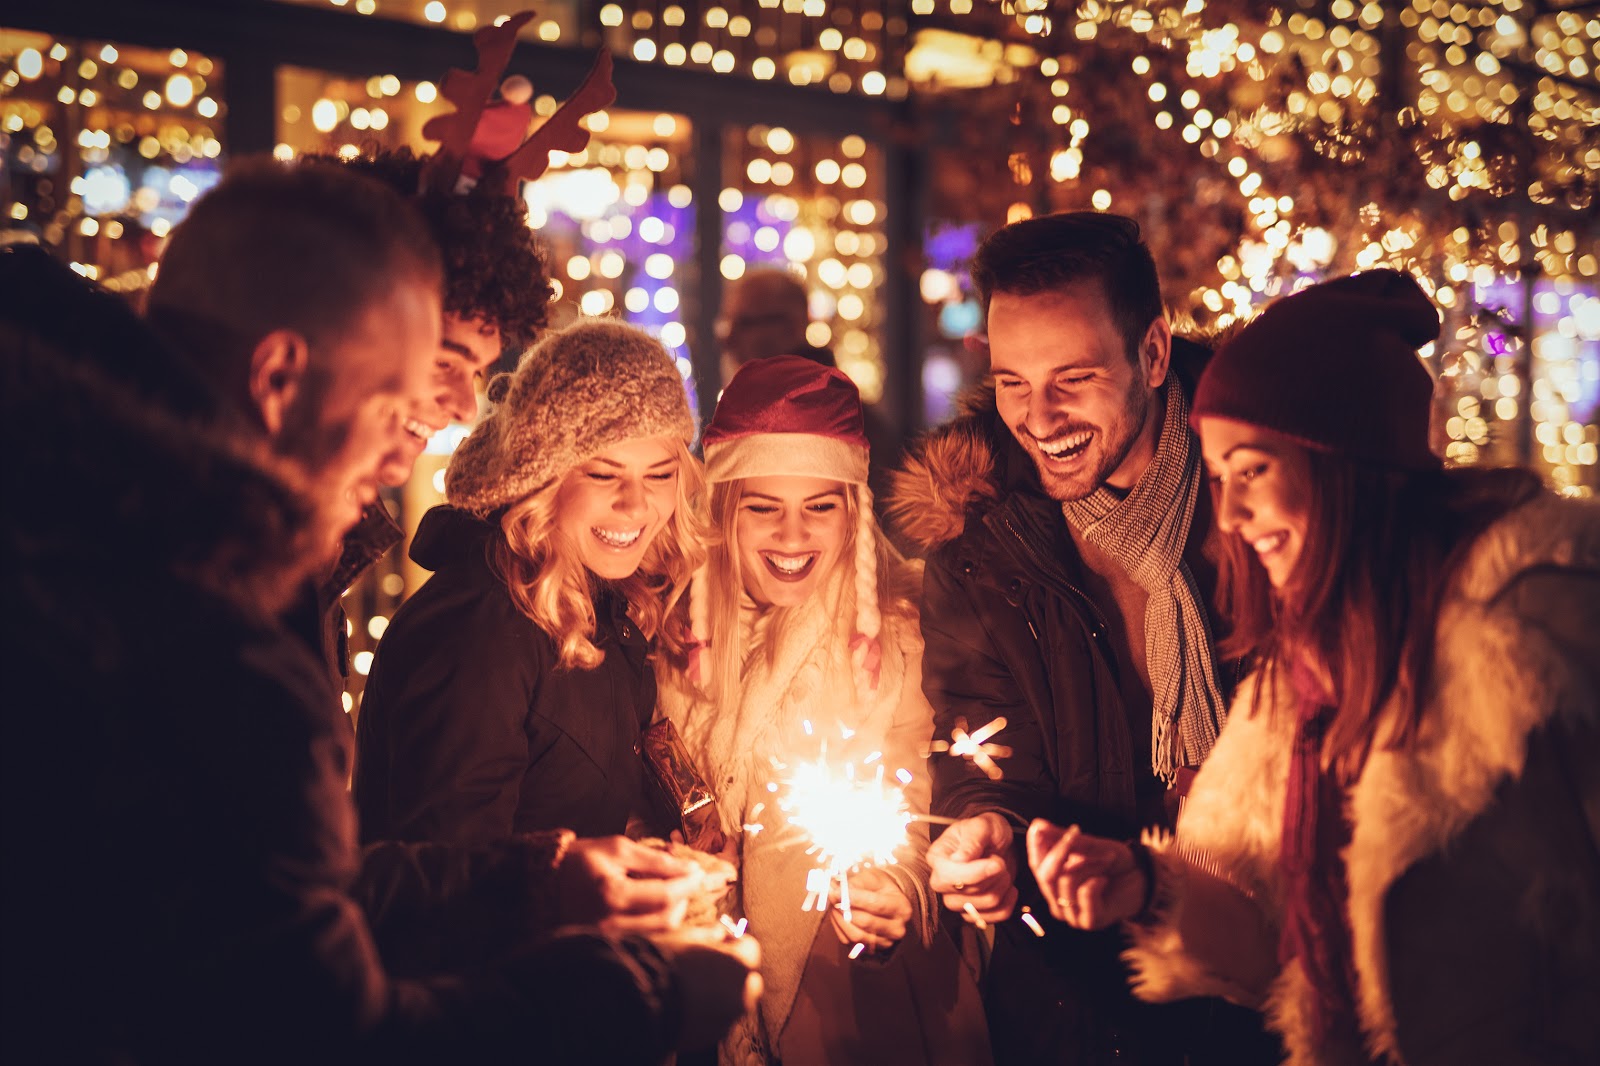 Christmas party ideas: A group celebrates with sparklers and Christmas lights behind them